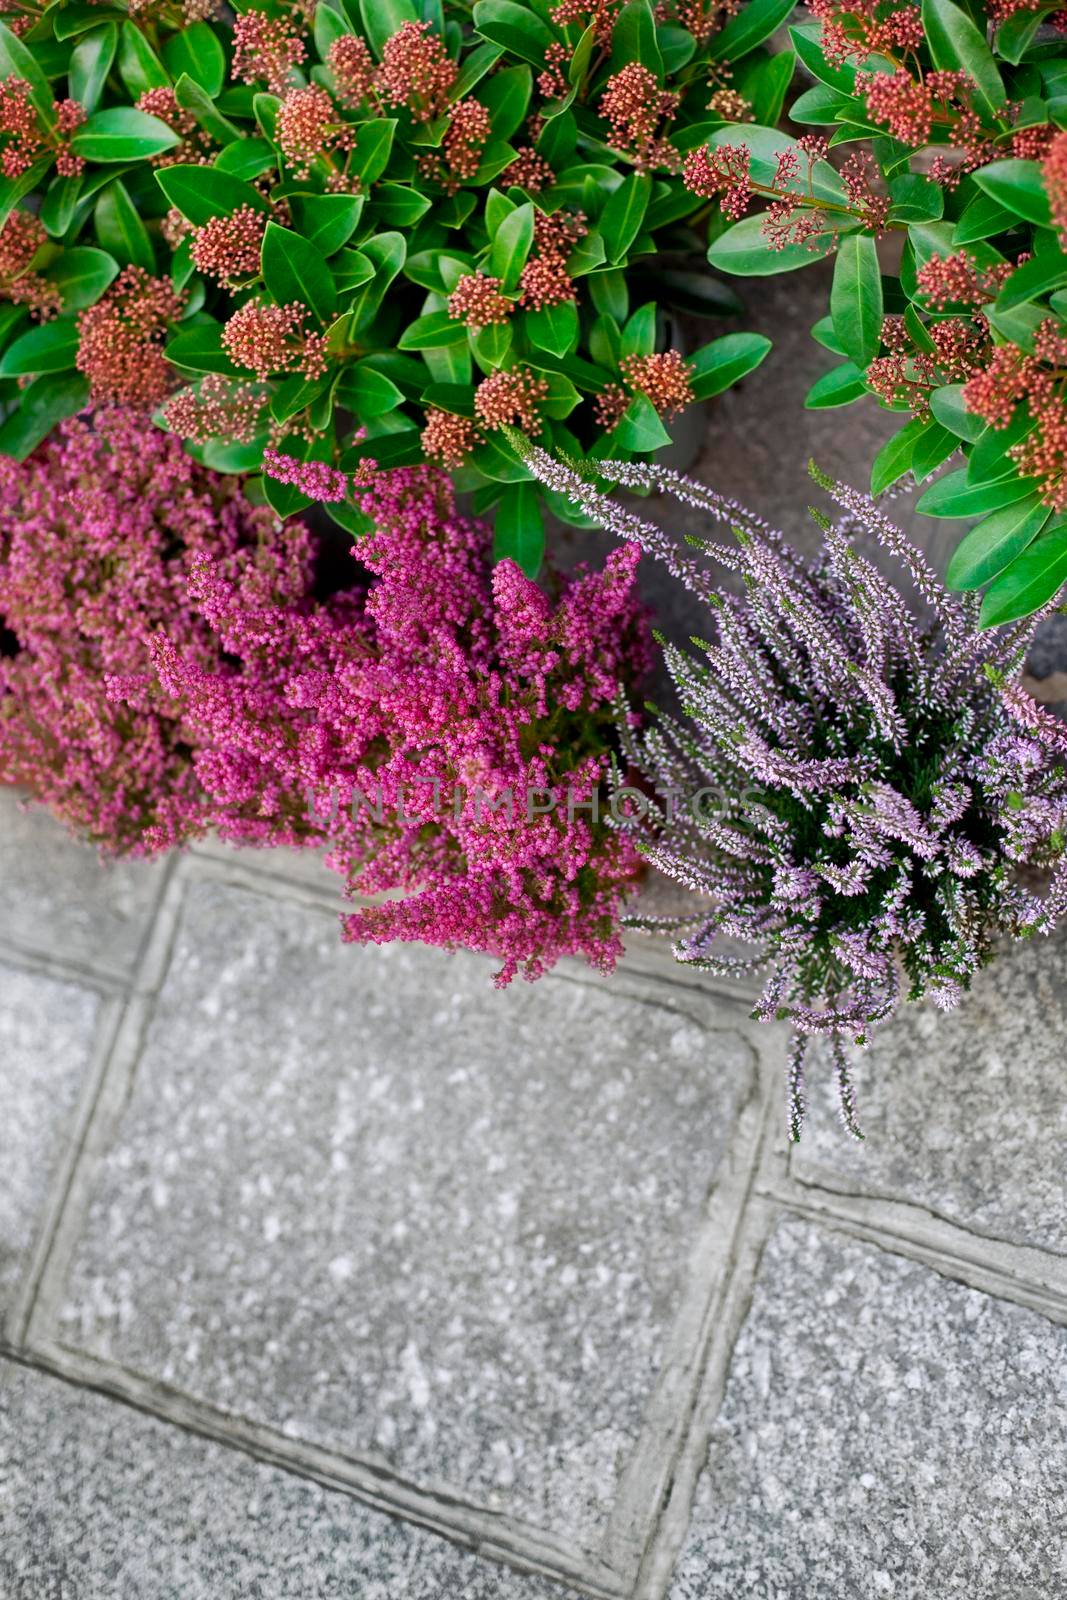 Plants and heather on a paved sidewalk